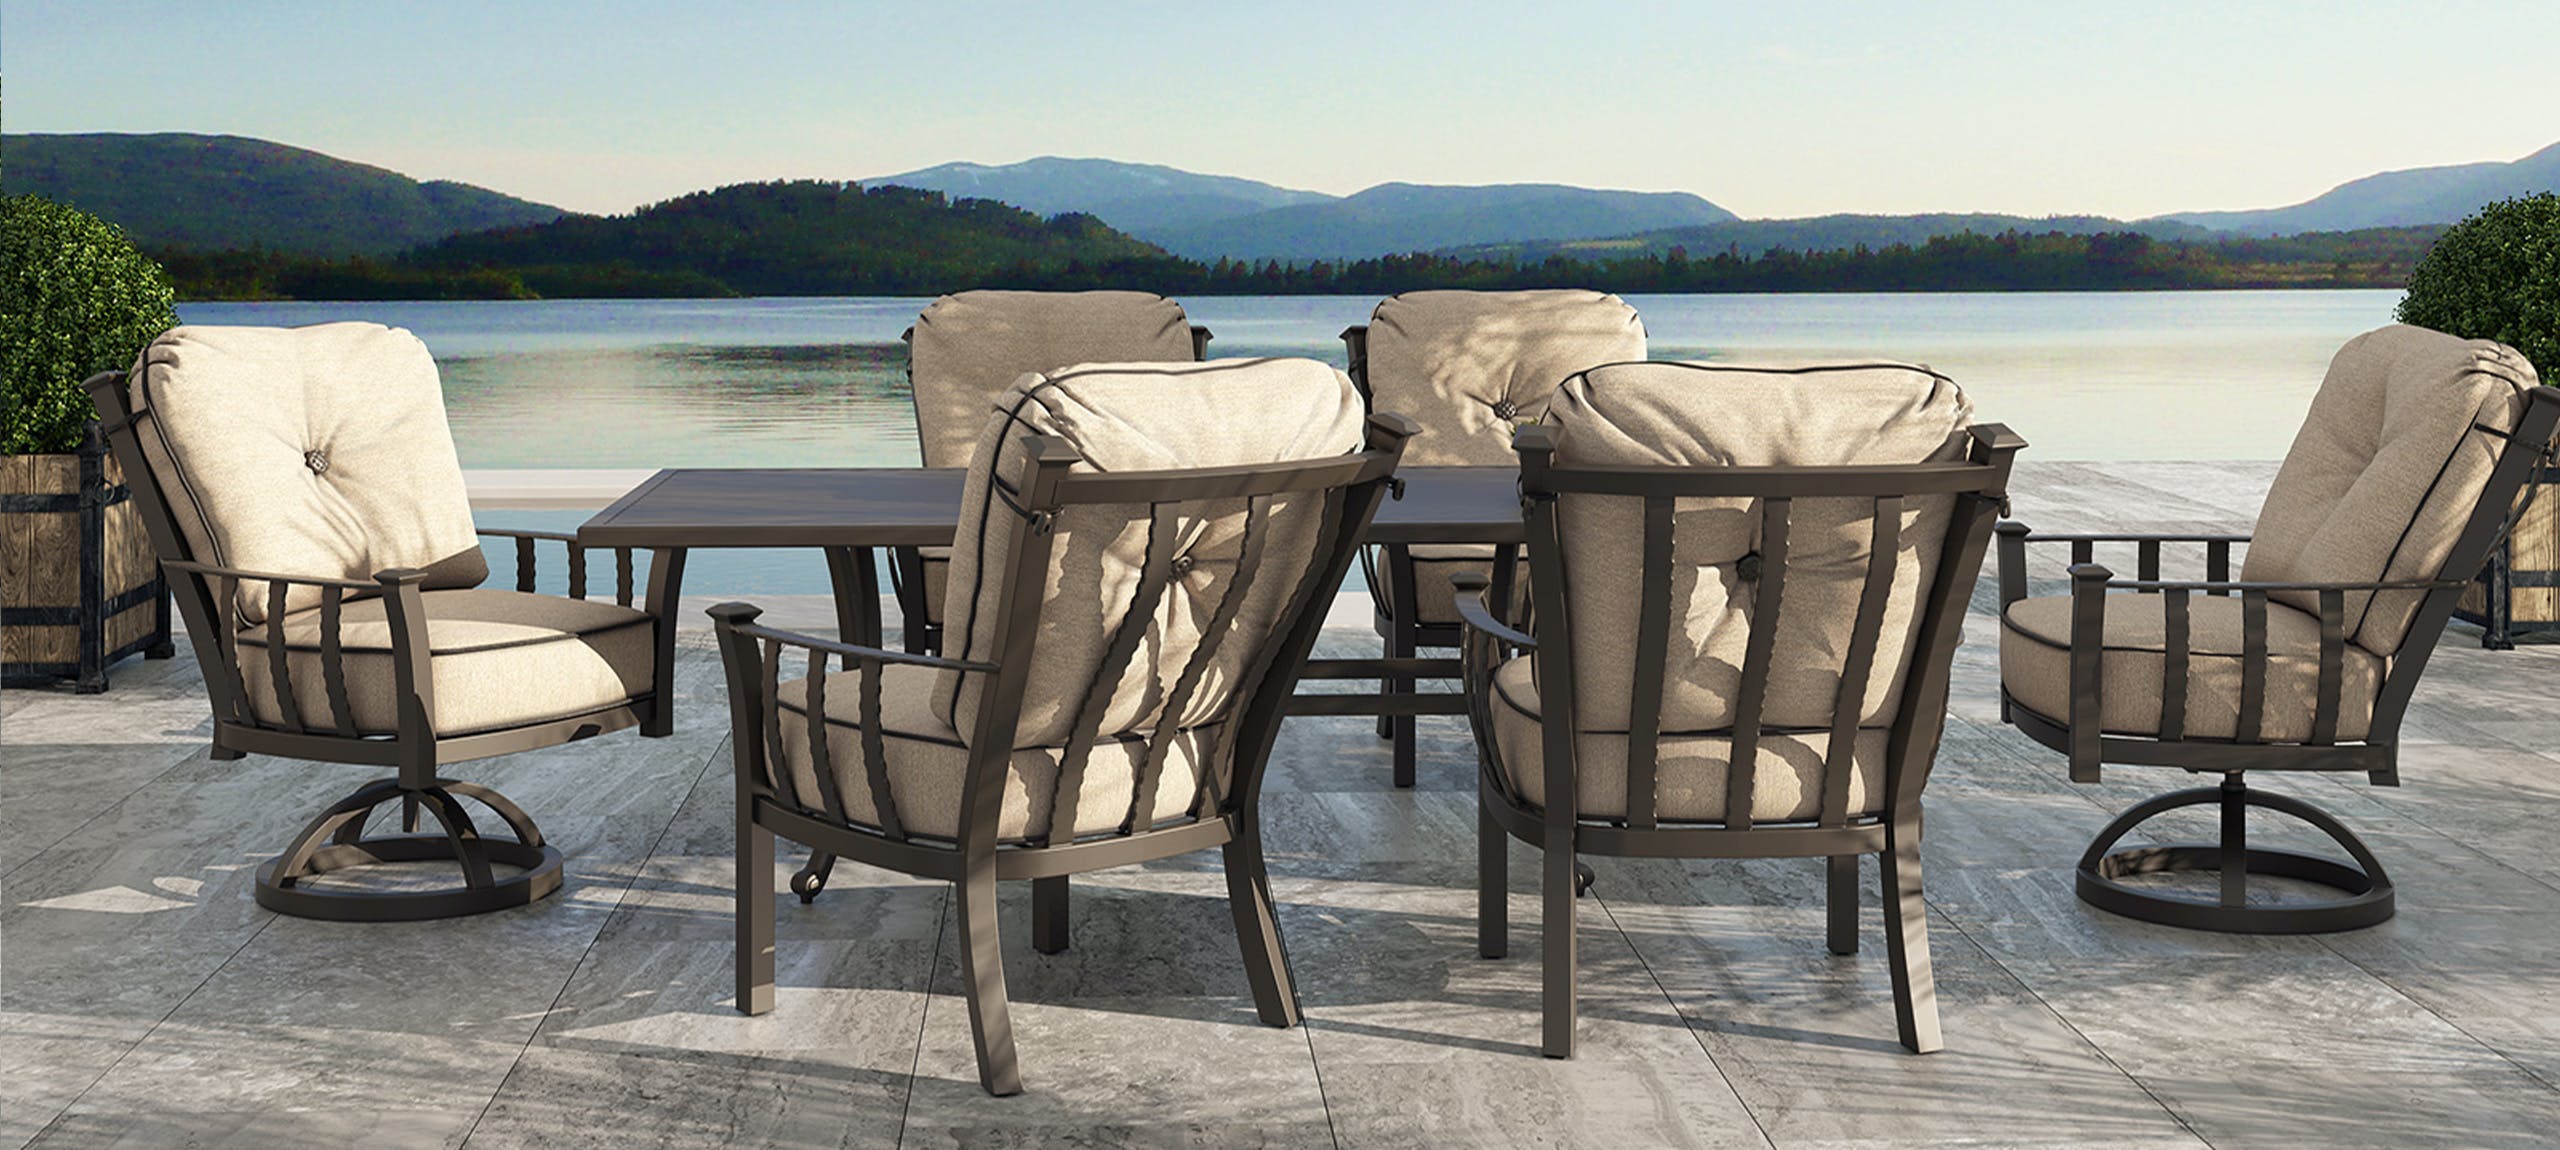 Santa Fe Cushion Outdoor Dining Set for 6 By Castelle